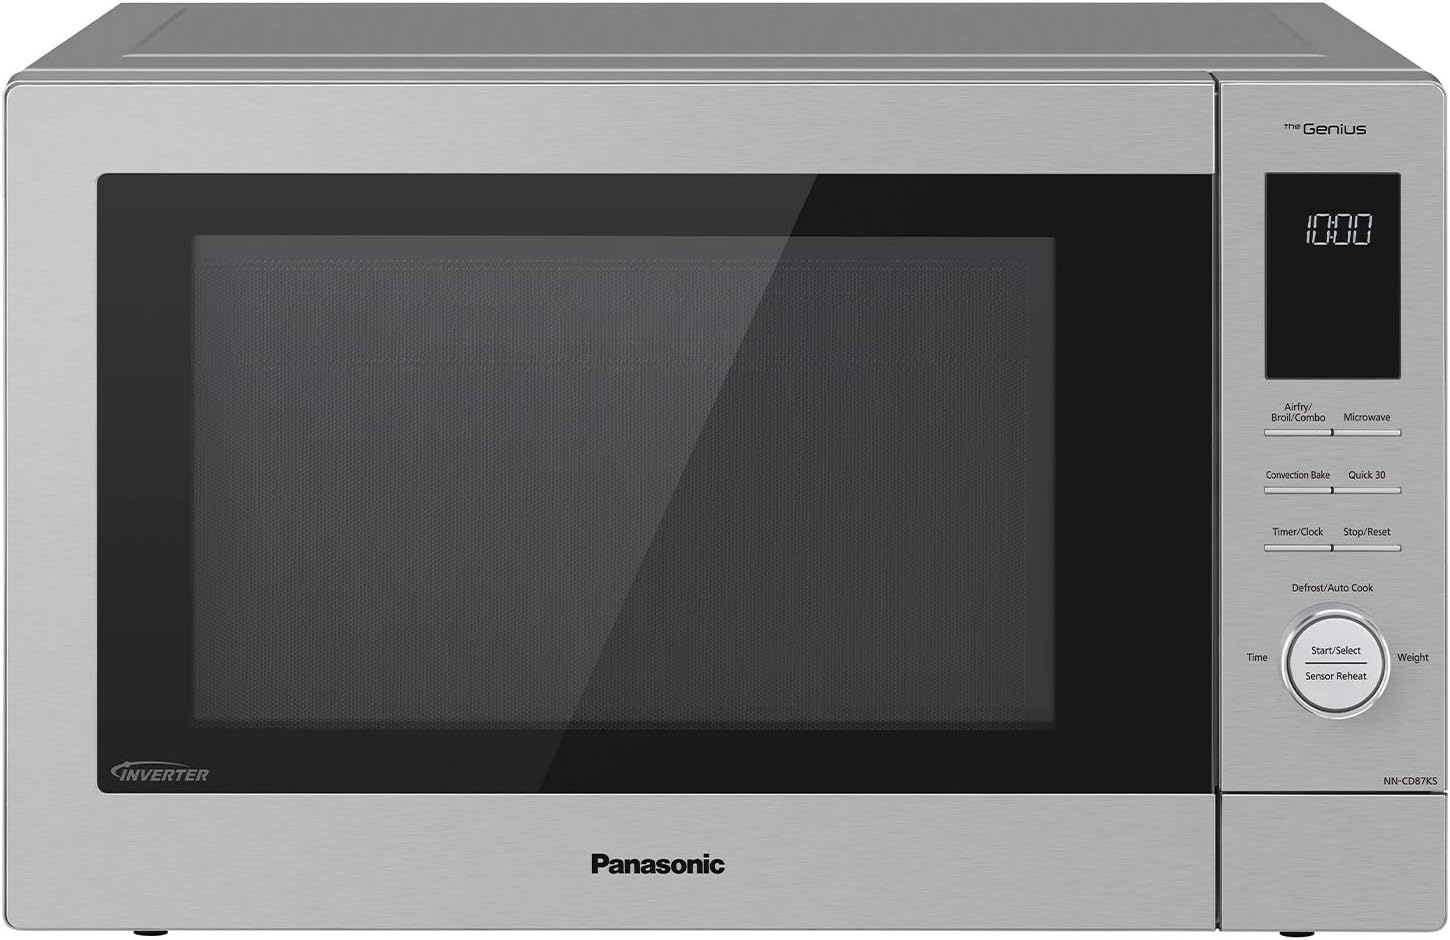 Panasonic (Product) RED 4-in-1 1000W Microwave Oven